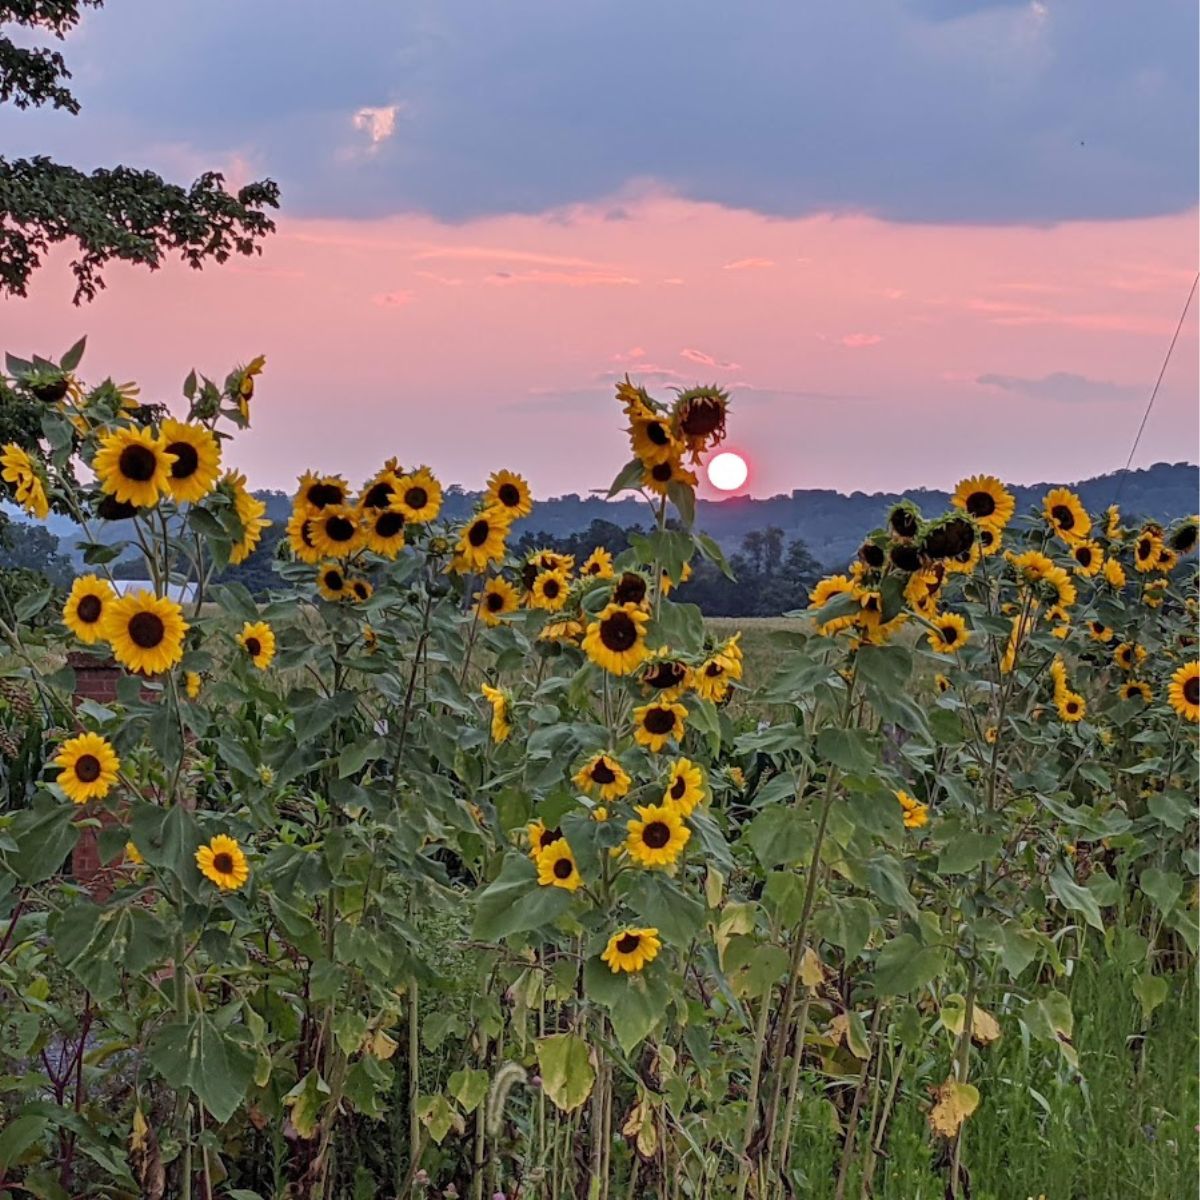 Sunflowers with beautiful pink skies and the sun setting in the background.